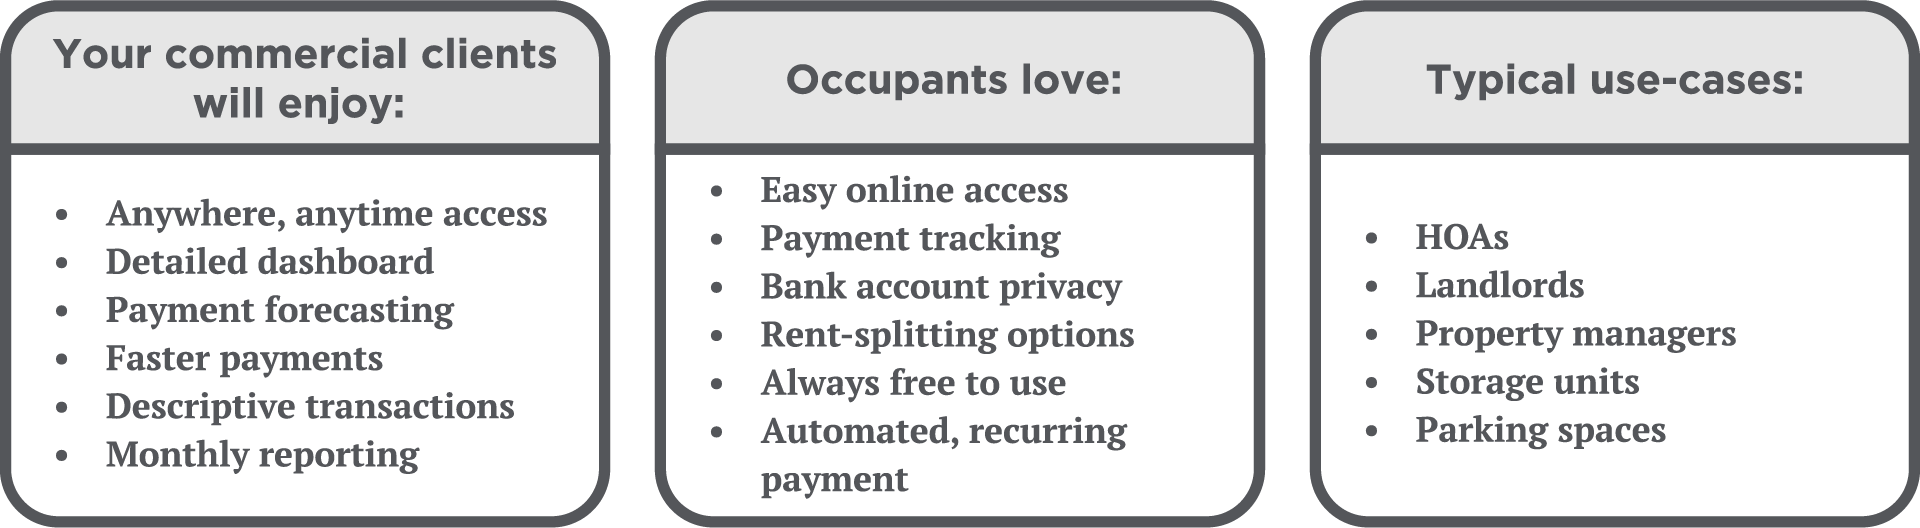 ZRent detailed list of features clients and occupants love as well as use cases for HOAs, landlords, property managers, storage units, parking spaces.